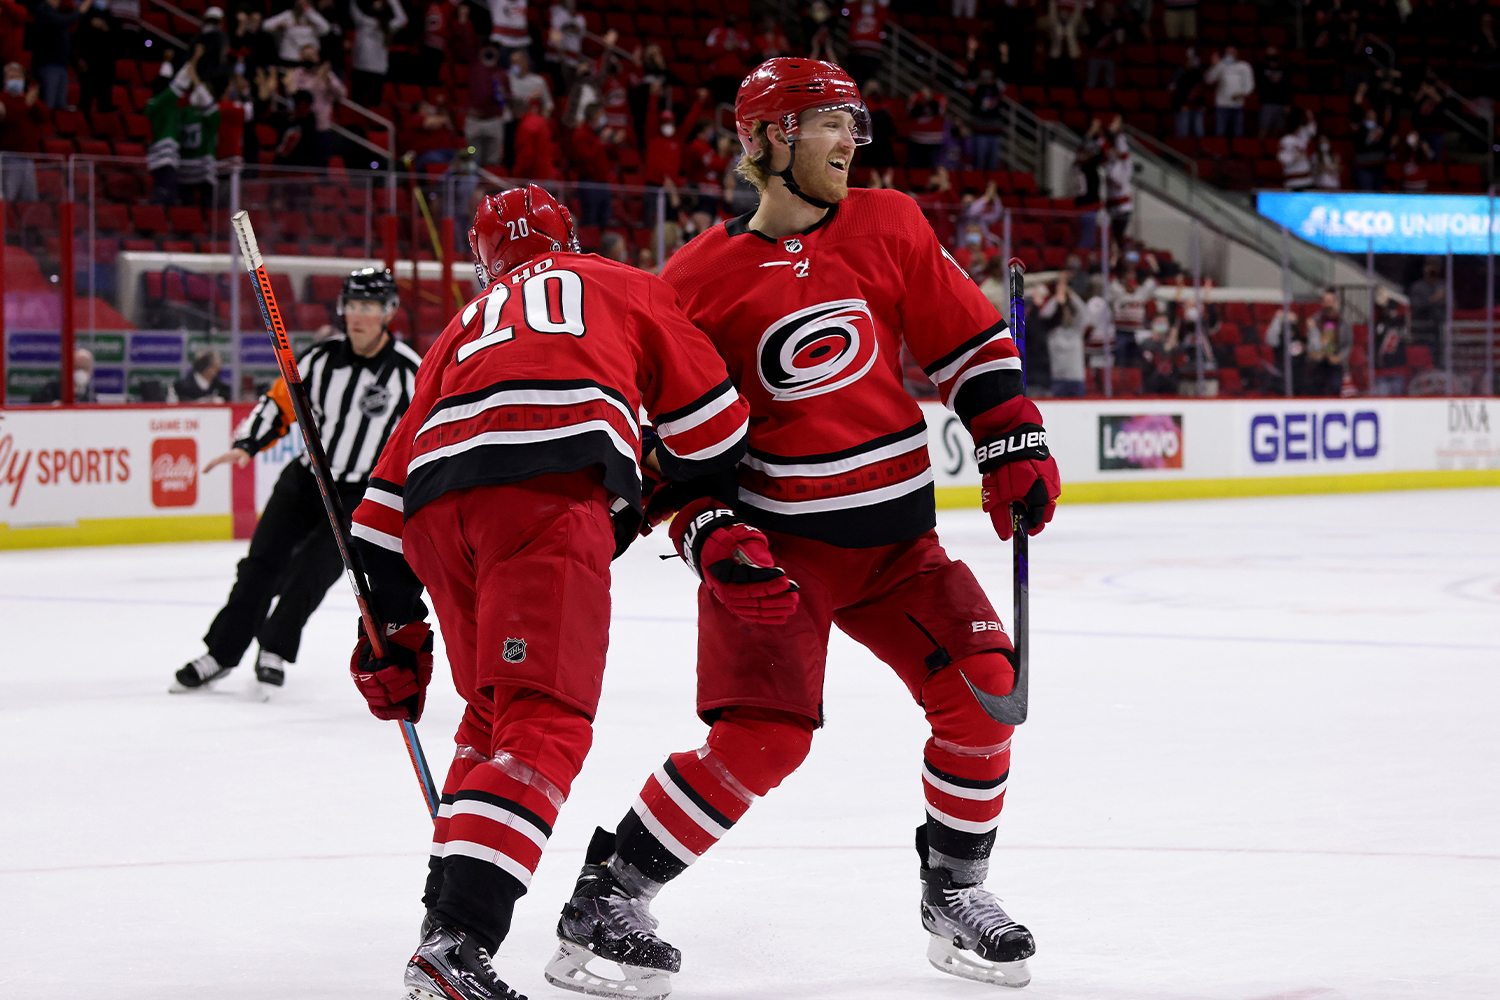 Dougie Hamilton #19 of the Carolina Hurricanes scores a goal in overtime and celebrates with teammate Sebastian Aho #20 during an NHL game against the Columbus Blue Jackets on May 1, 2021